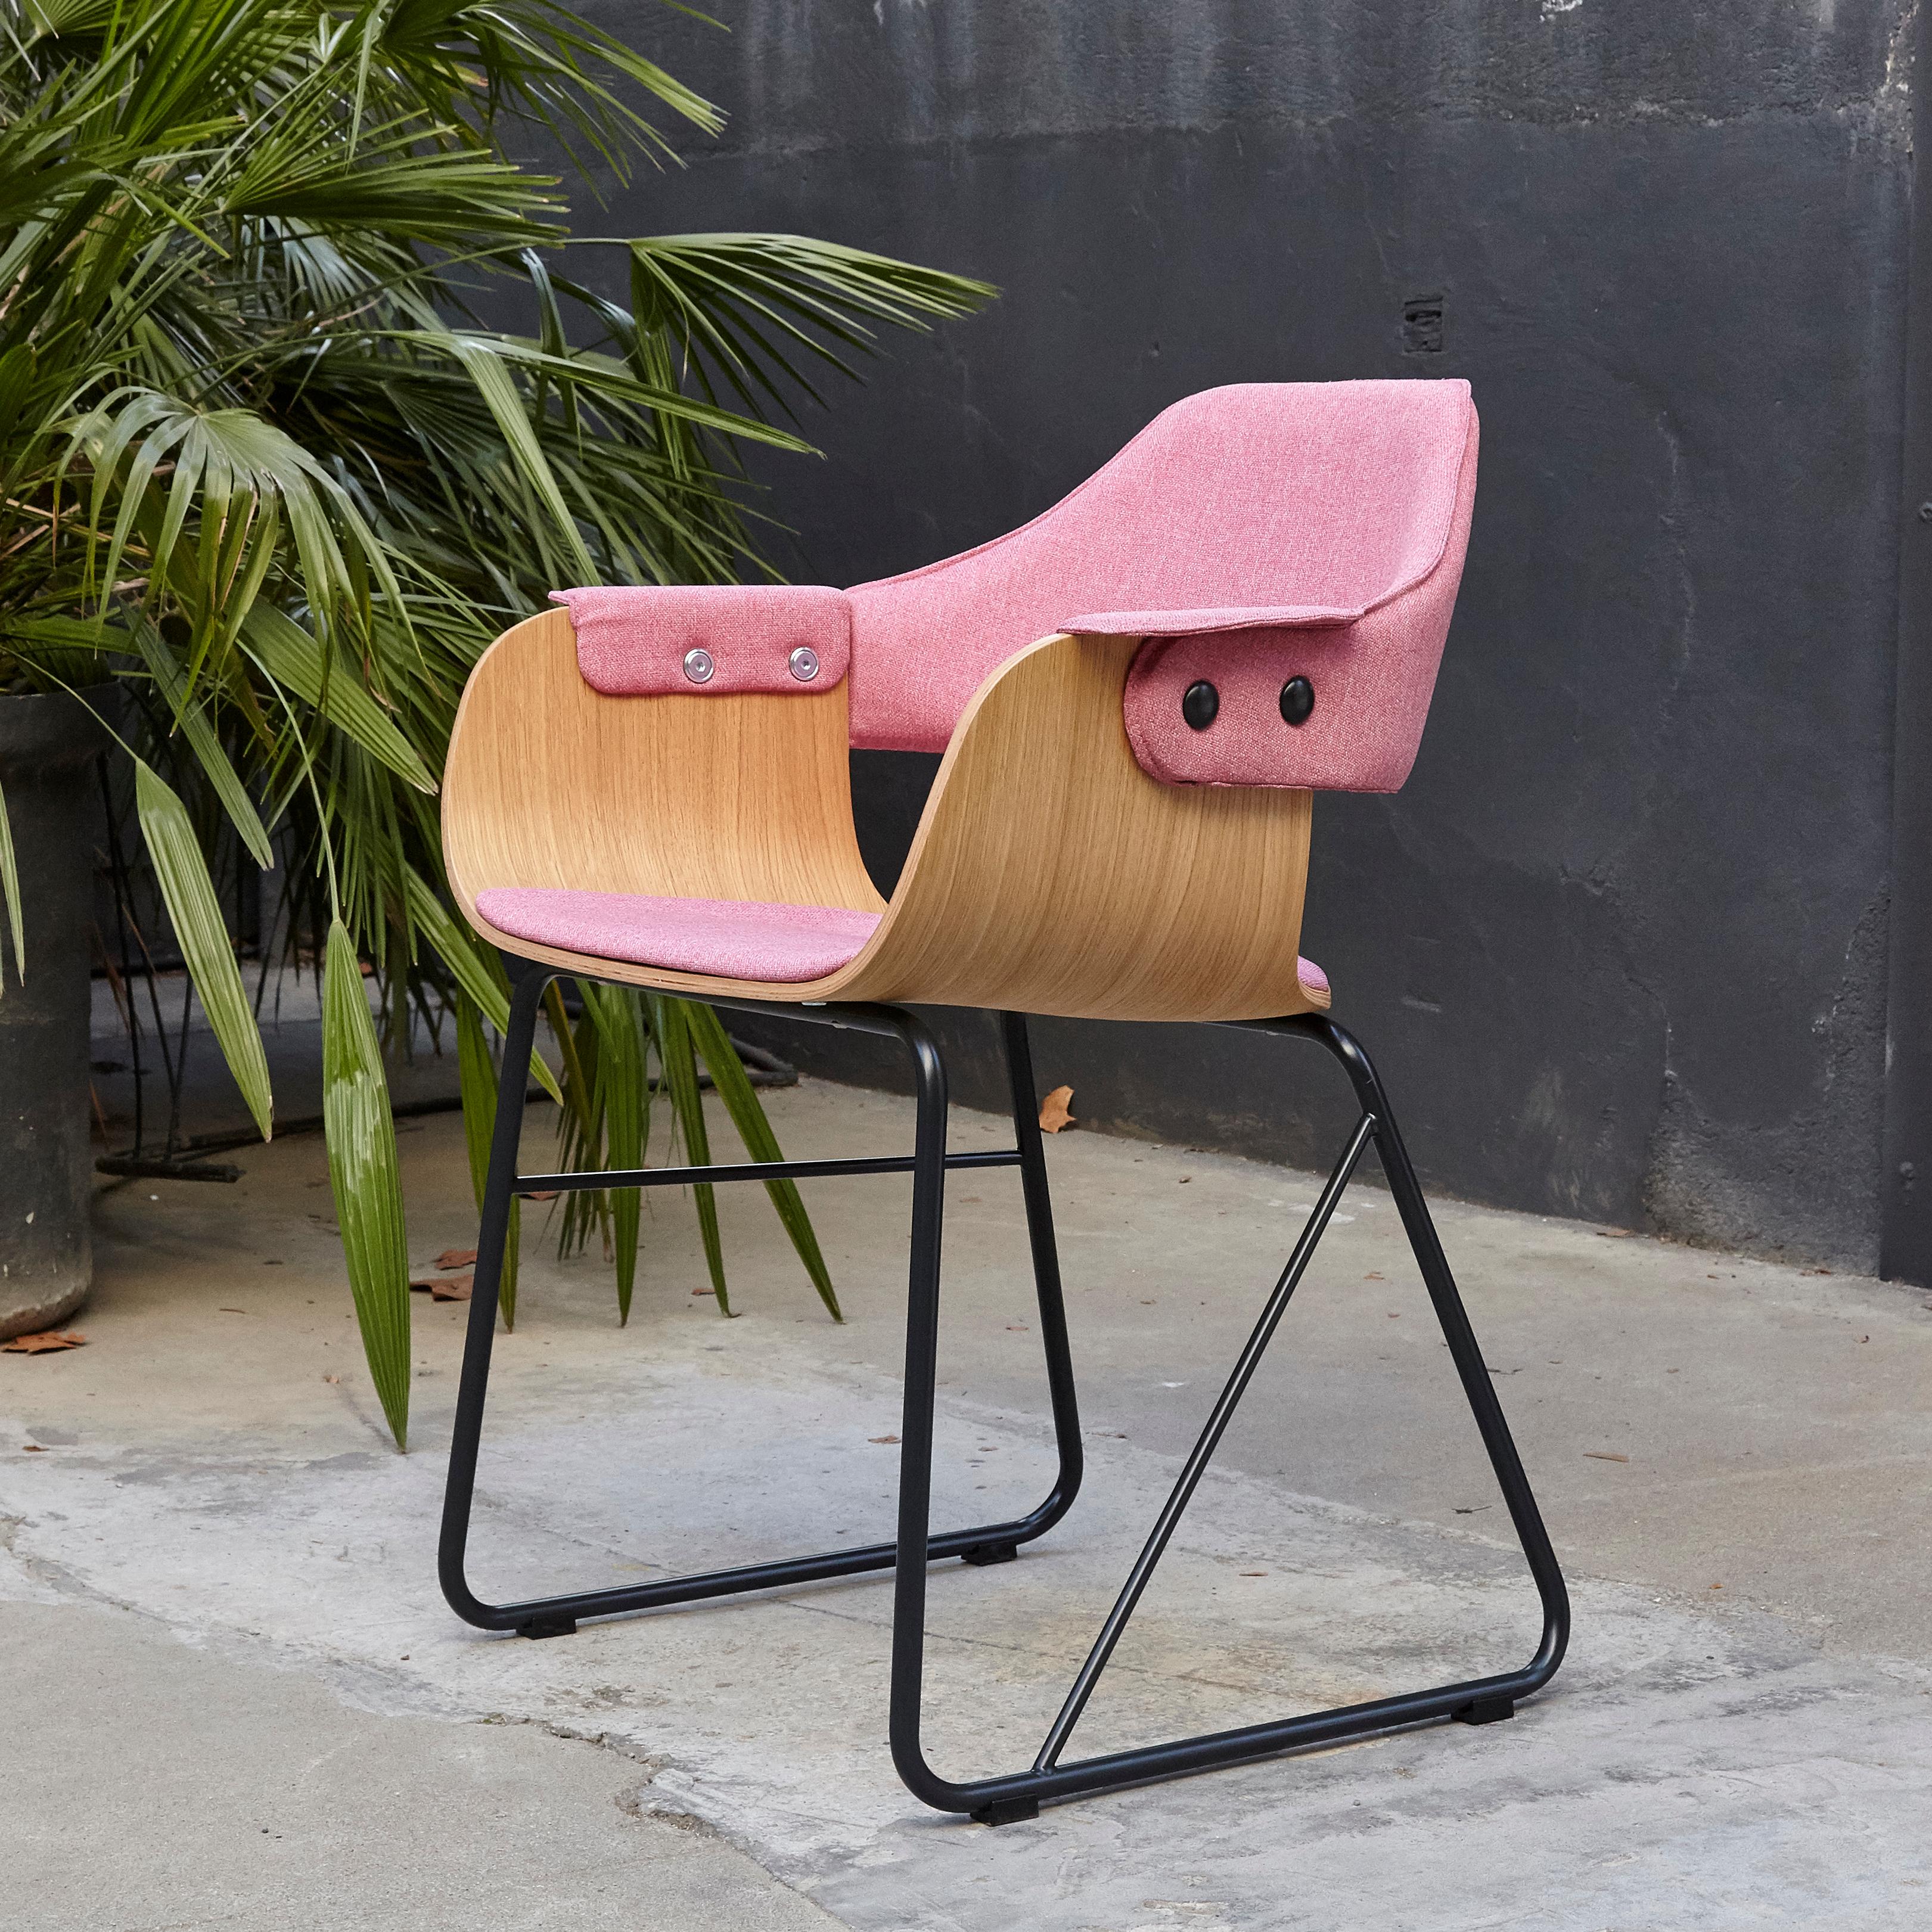 Modern Jaime Hayon Contemporary Pink Upholstered Wood Chair Showtime by BD Barcelona